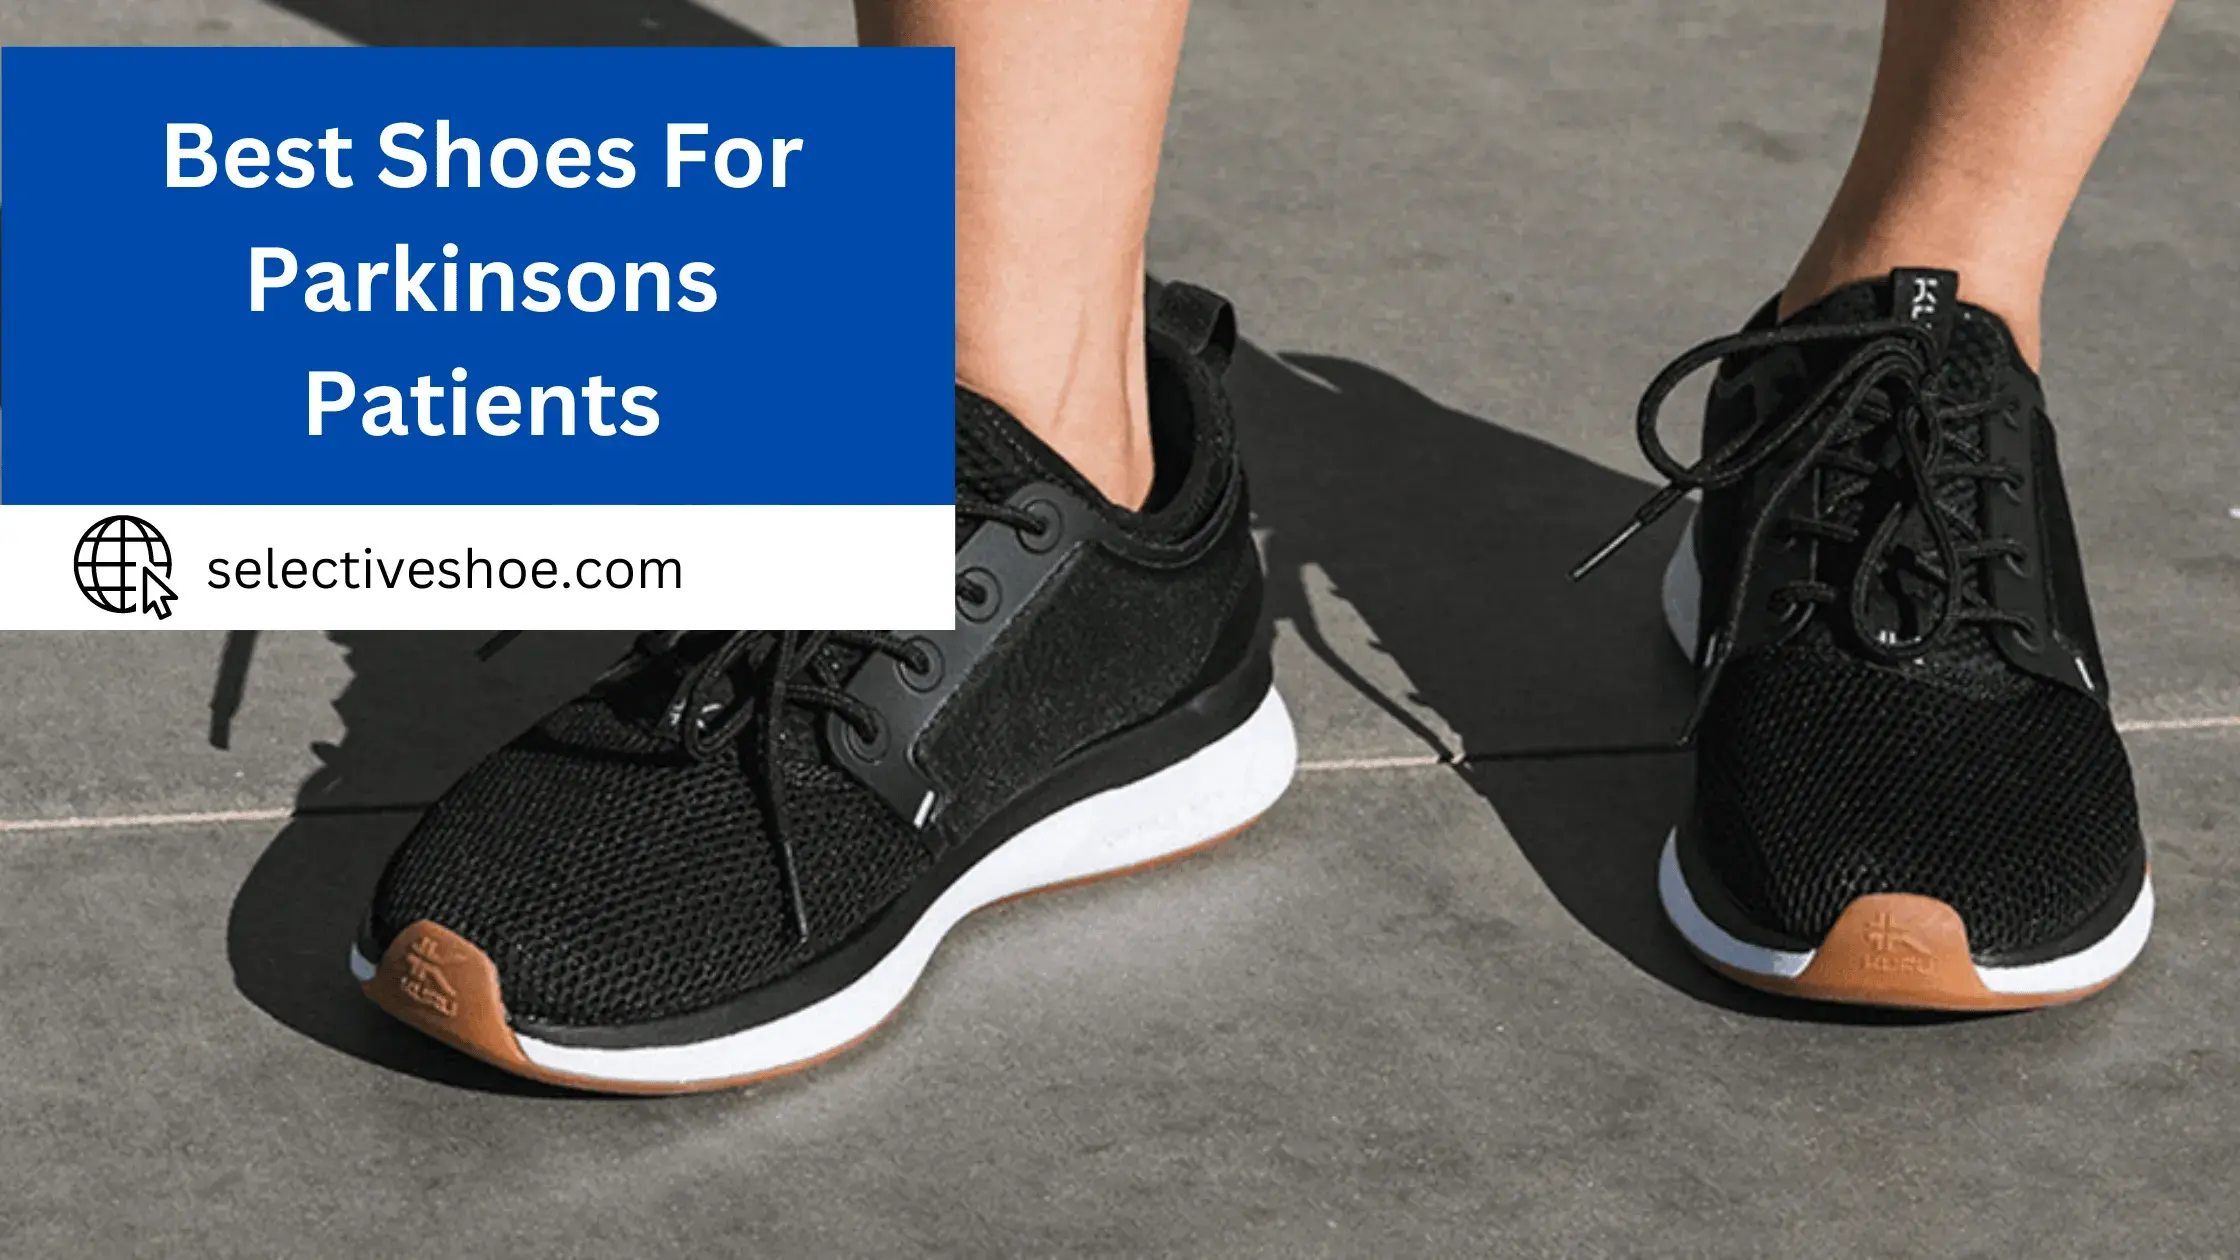 Best Shoes For Parkinsons Patients - (An In-Depth Guide)